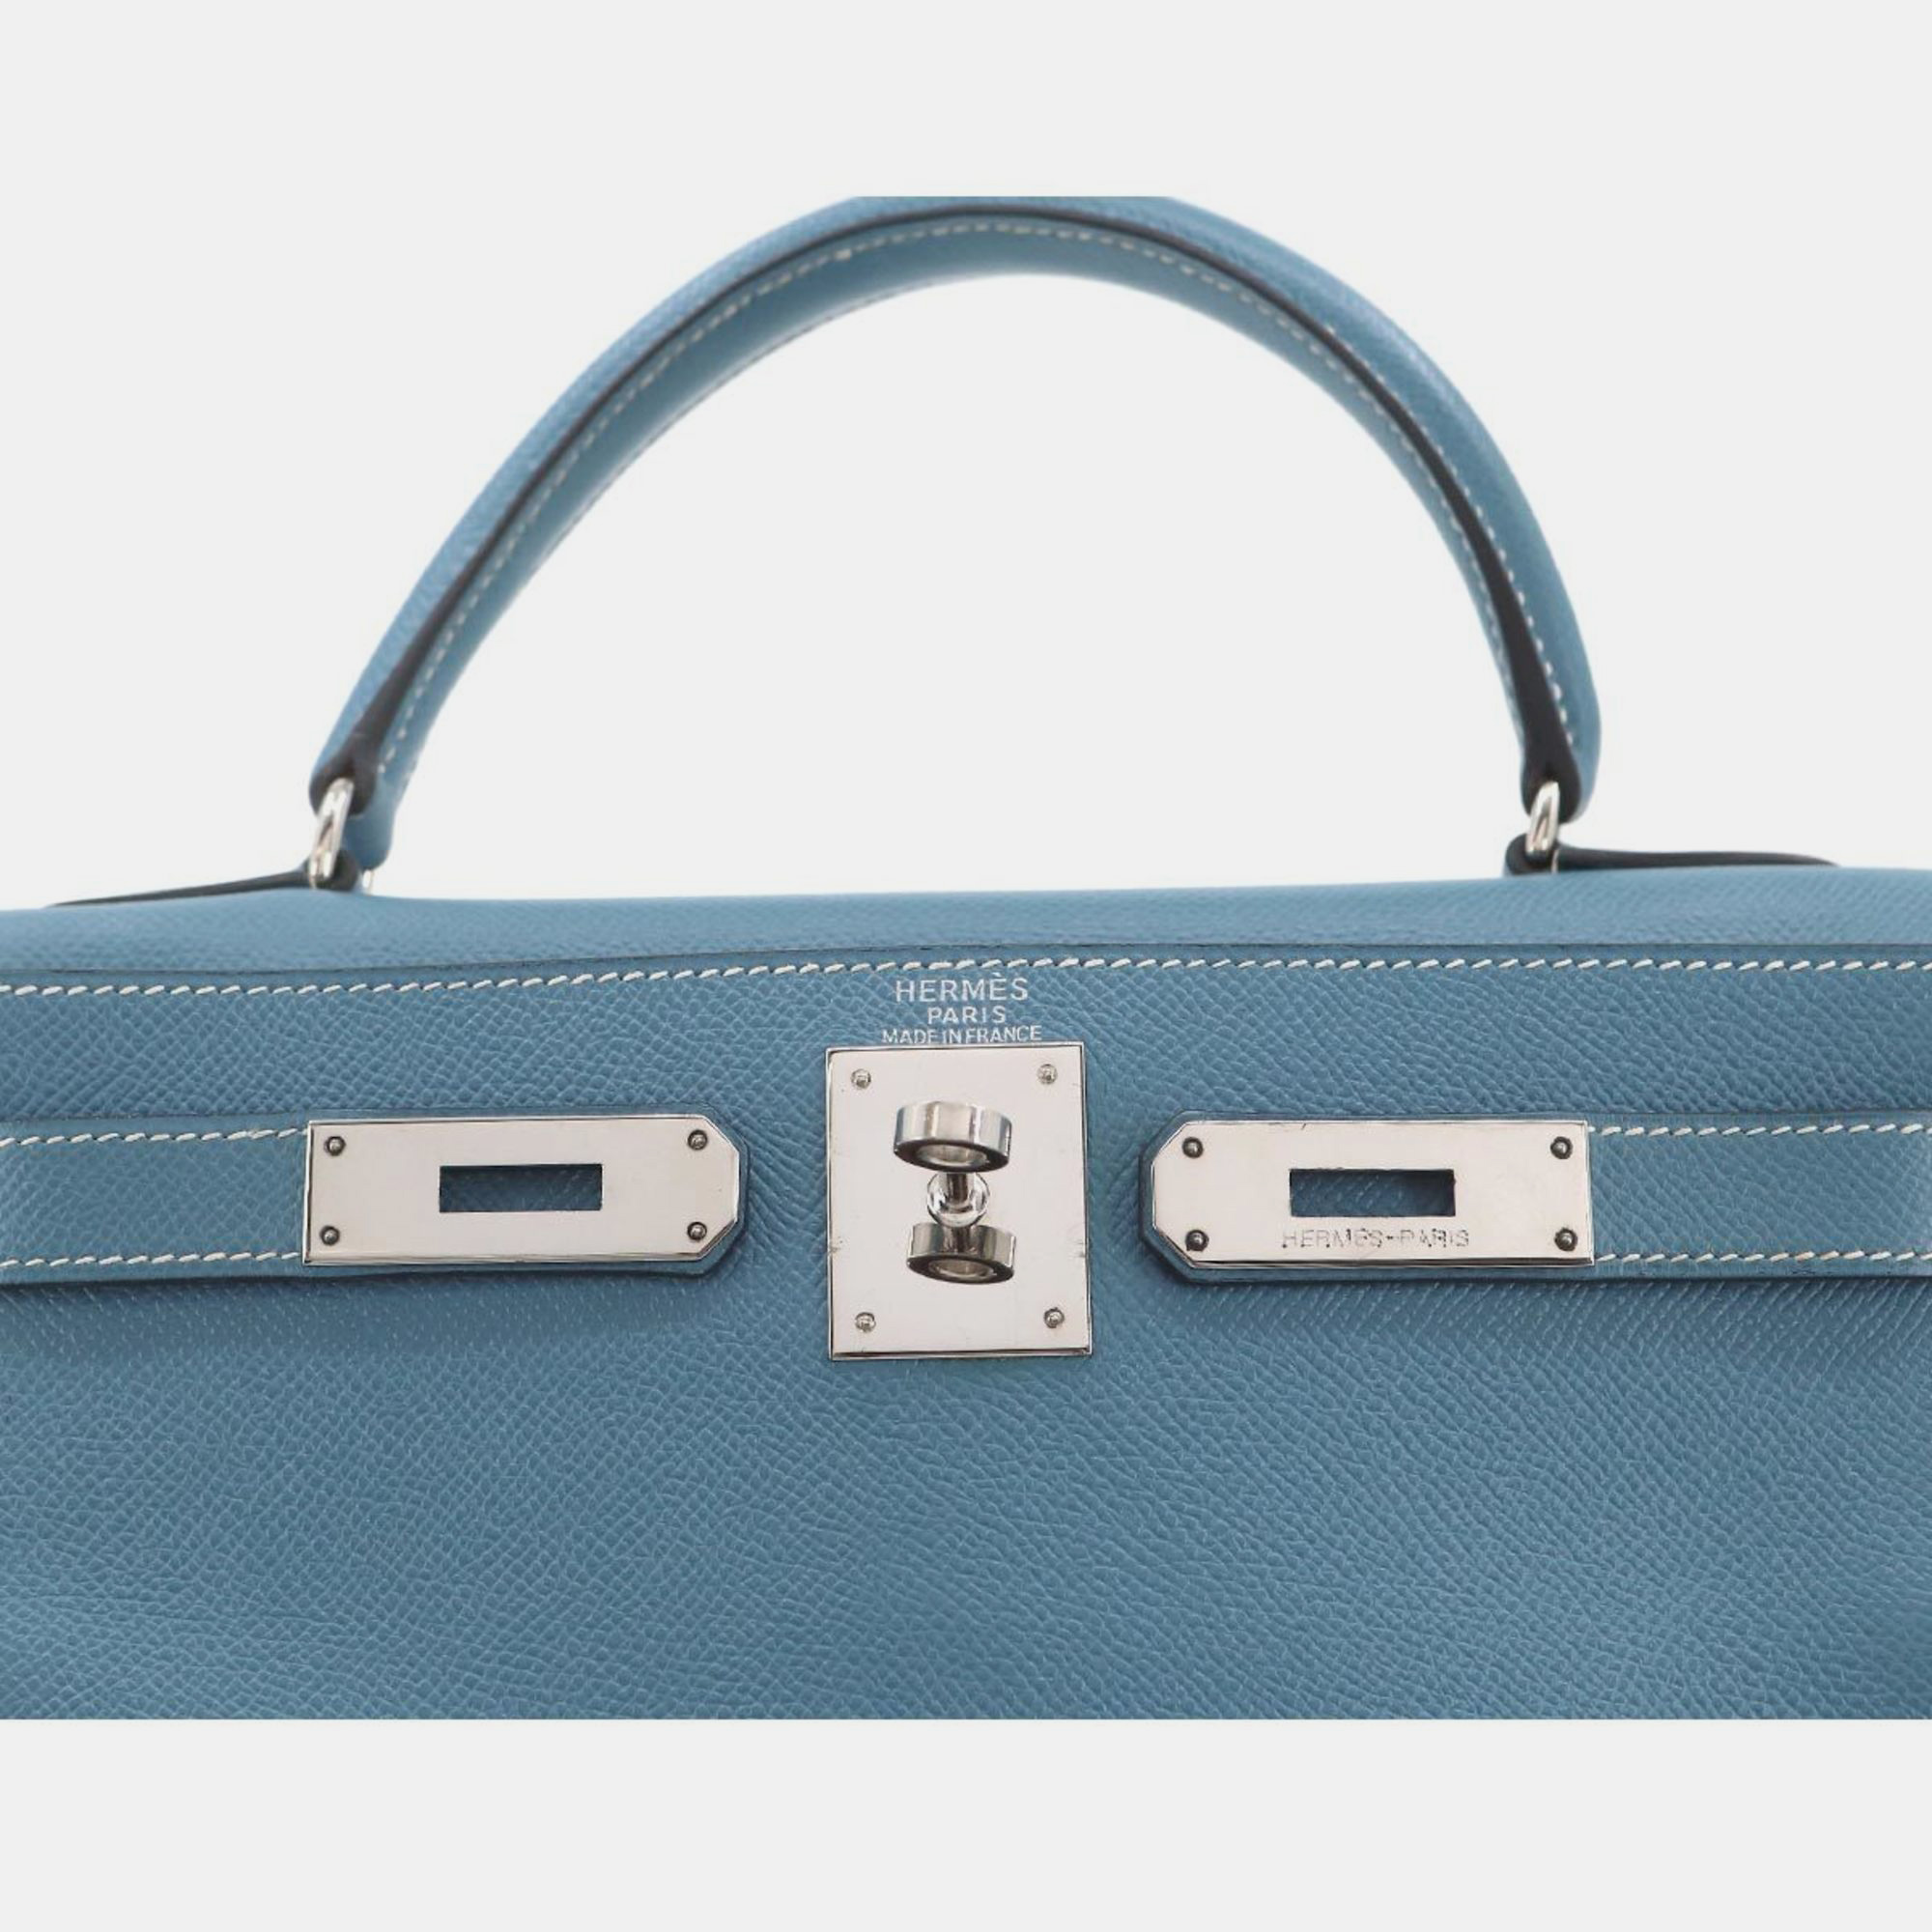 HERMES Kelly 28 2way Hand Shoulder Bag Couchevel Epson Blue Jean B Stamp Inner Stitching Silver Metal Fittings